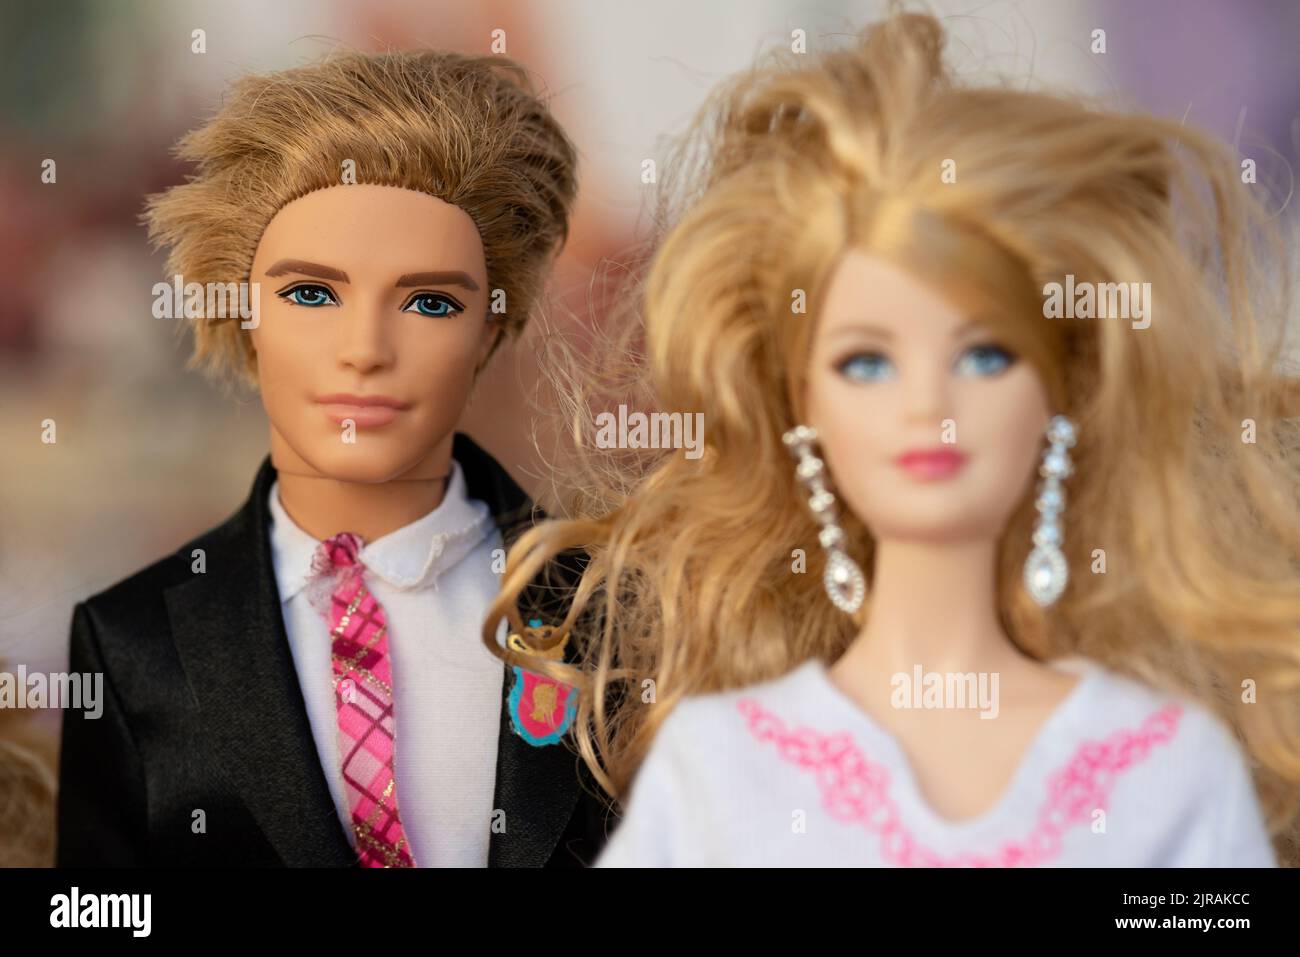 Ken and Barbie Toys Dolls Stock Photo